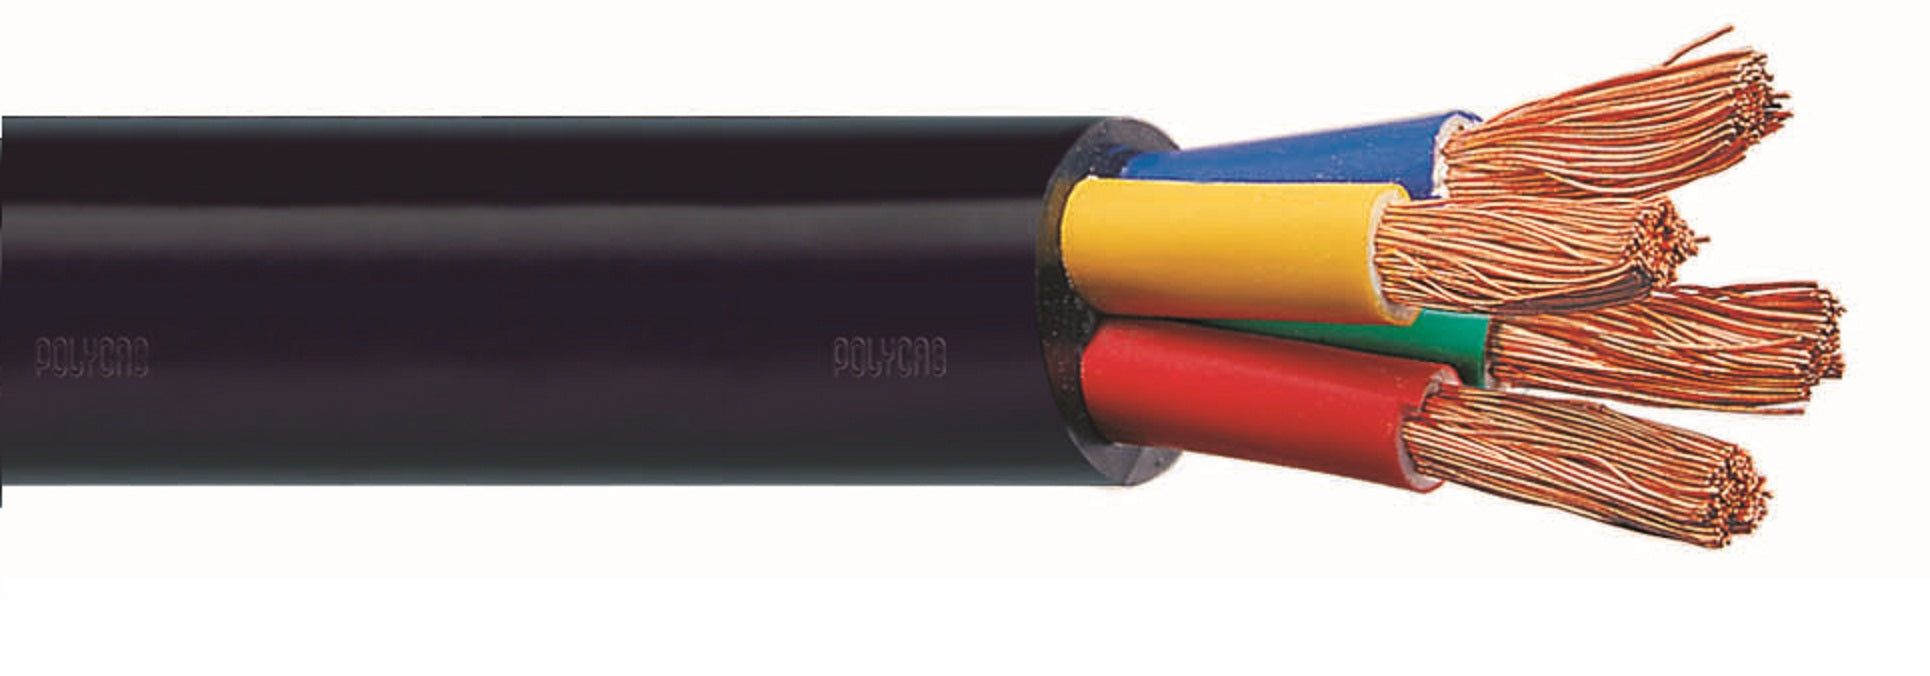 Polycab 16 Sqmm 4 core Black Copper Flexible InsFrls Cable (100 Meters)